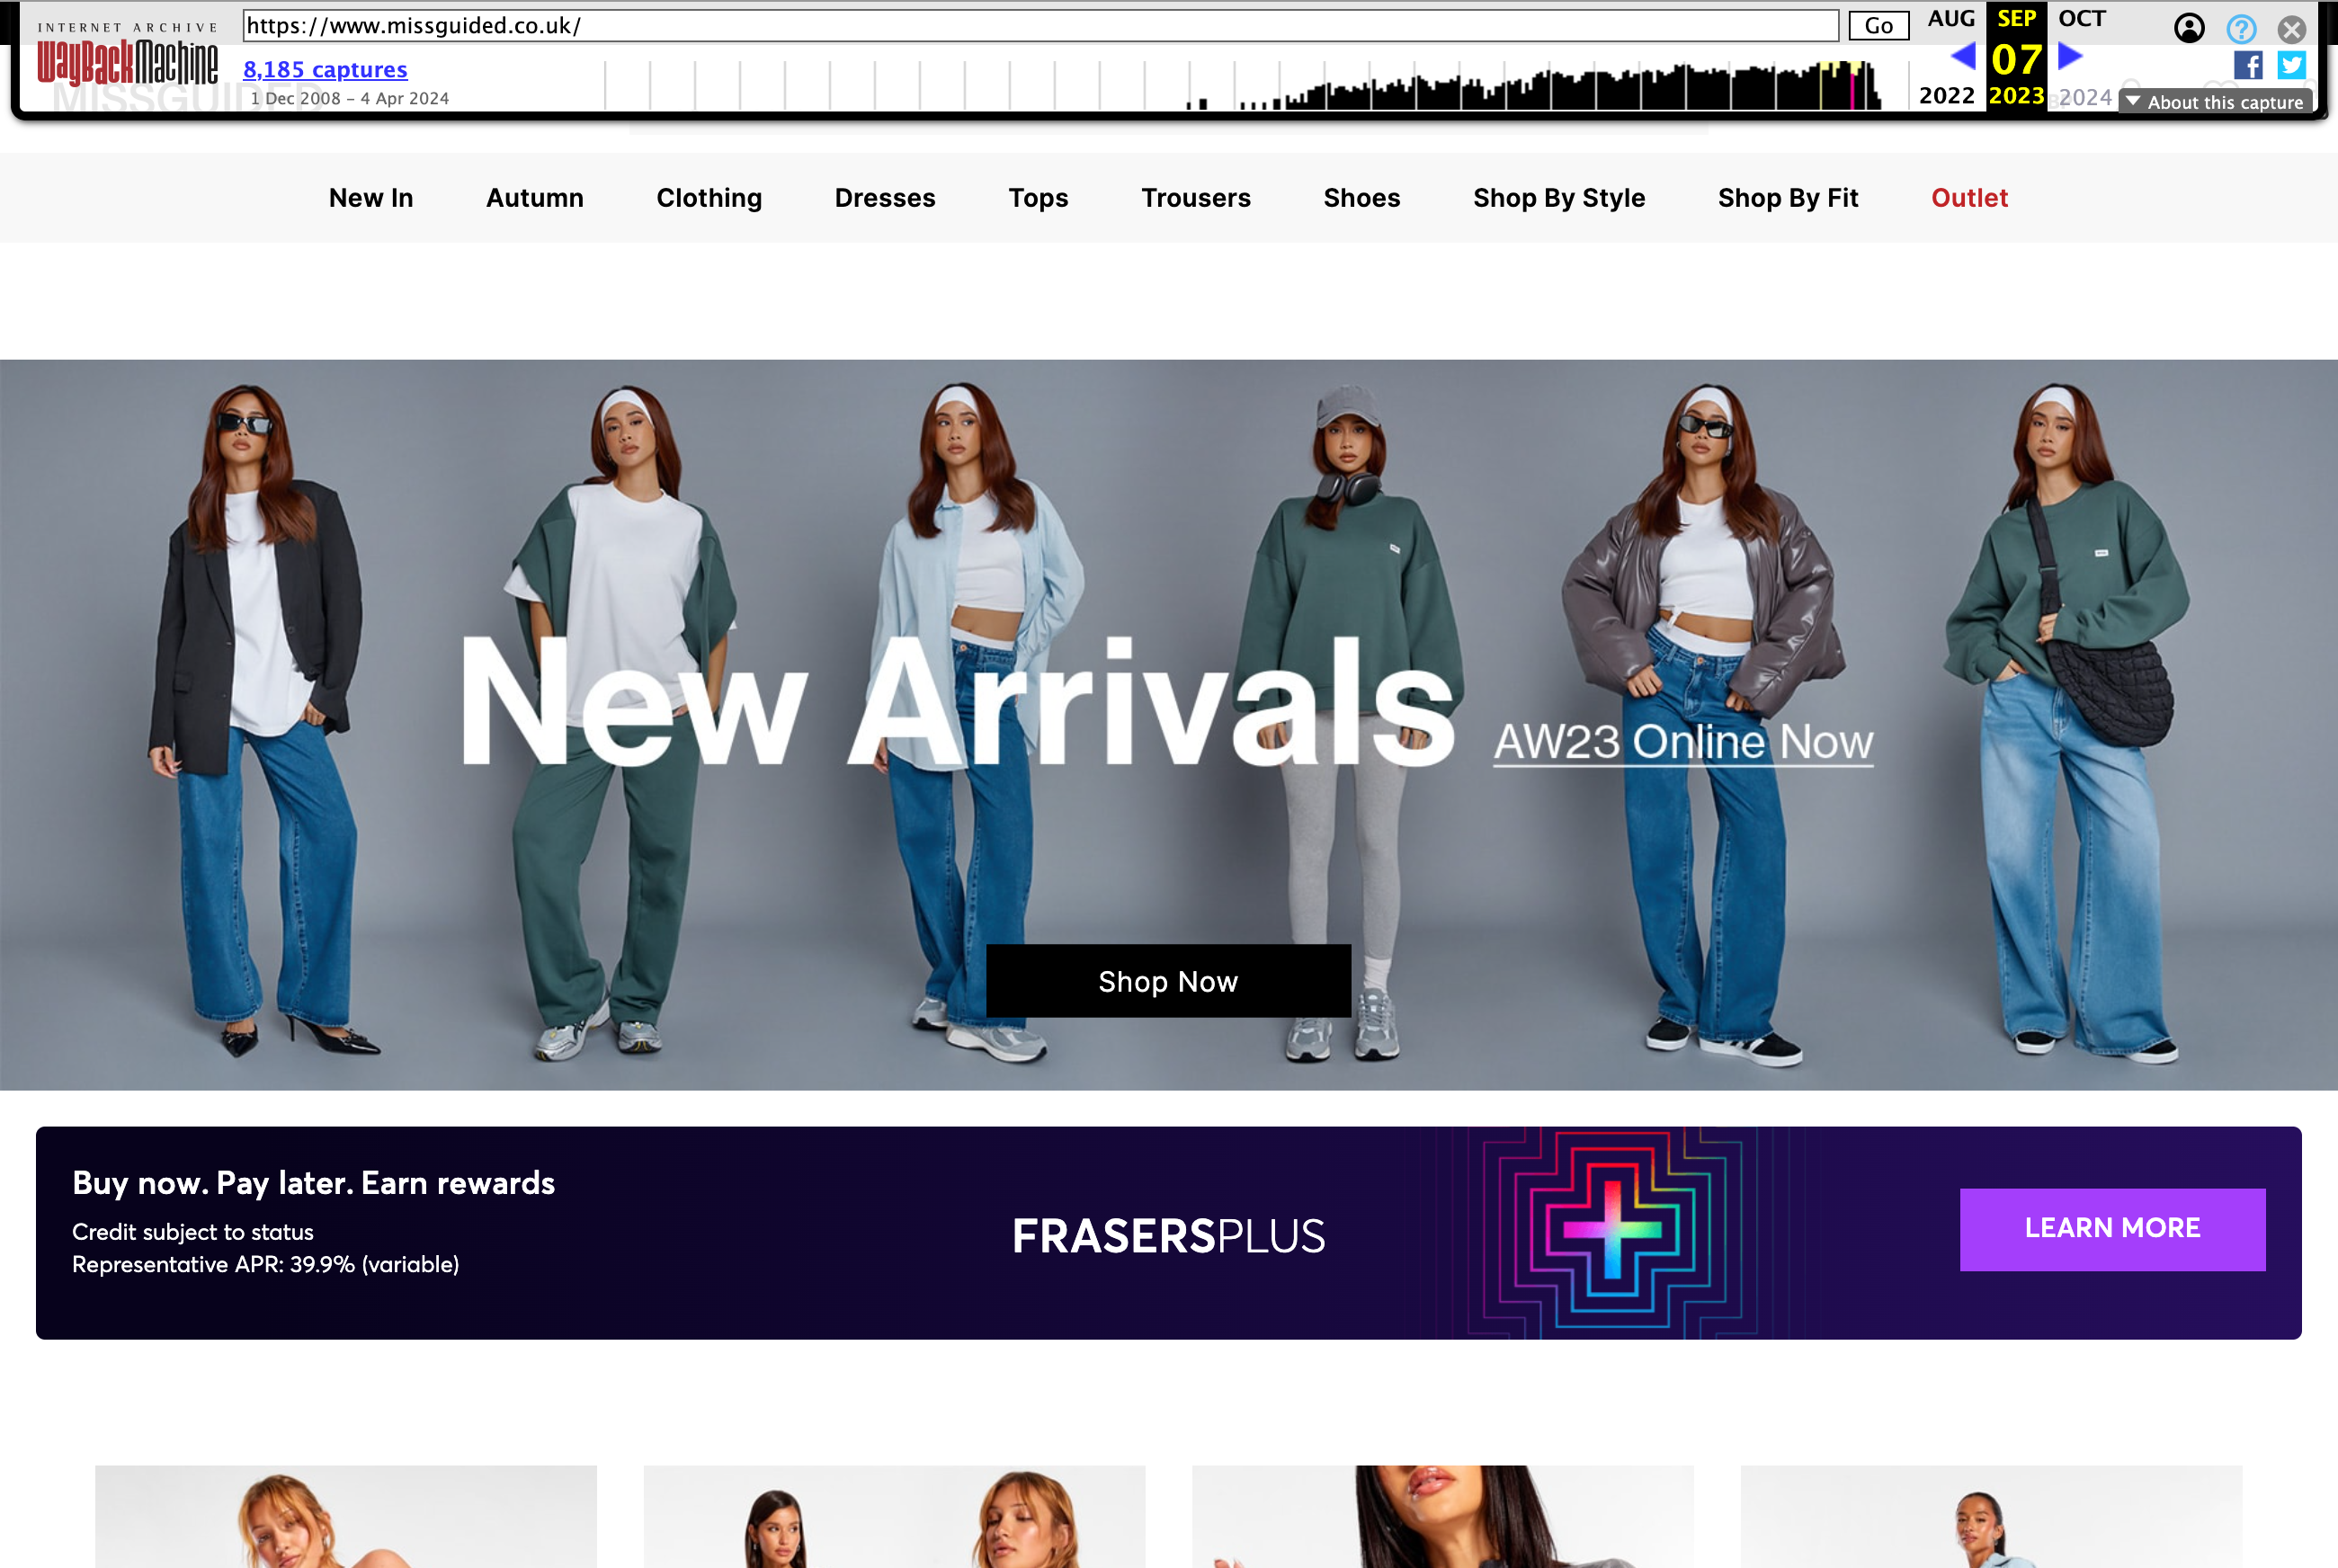 Missguided home page in September 2022.